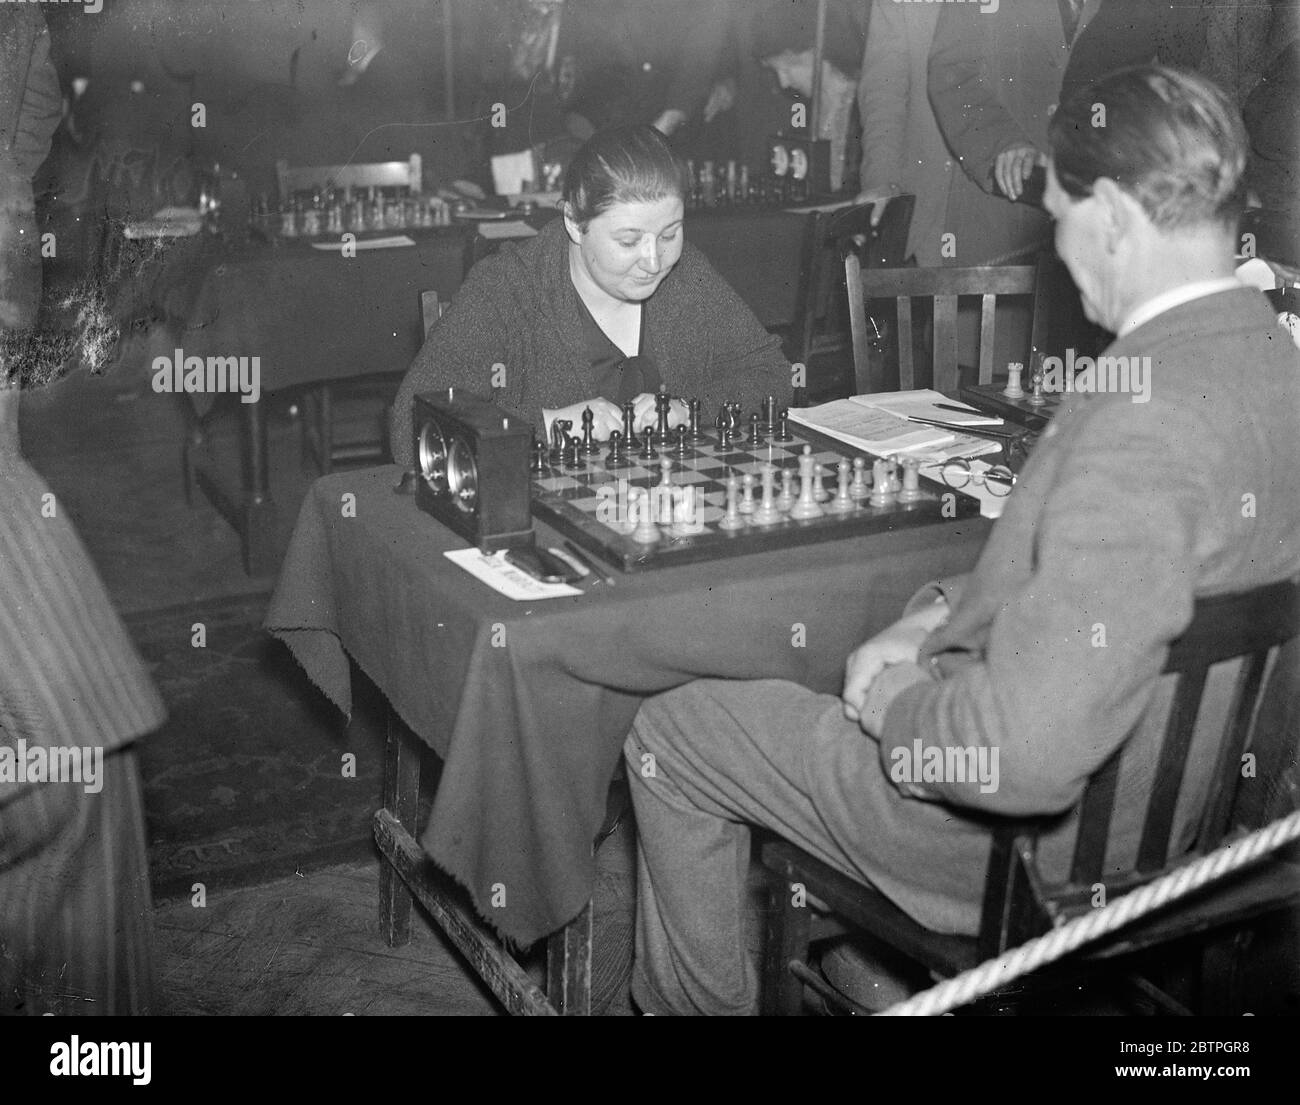 Humphrey Bogart was a master-level chess player and U.S. Chess